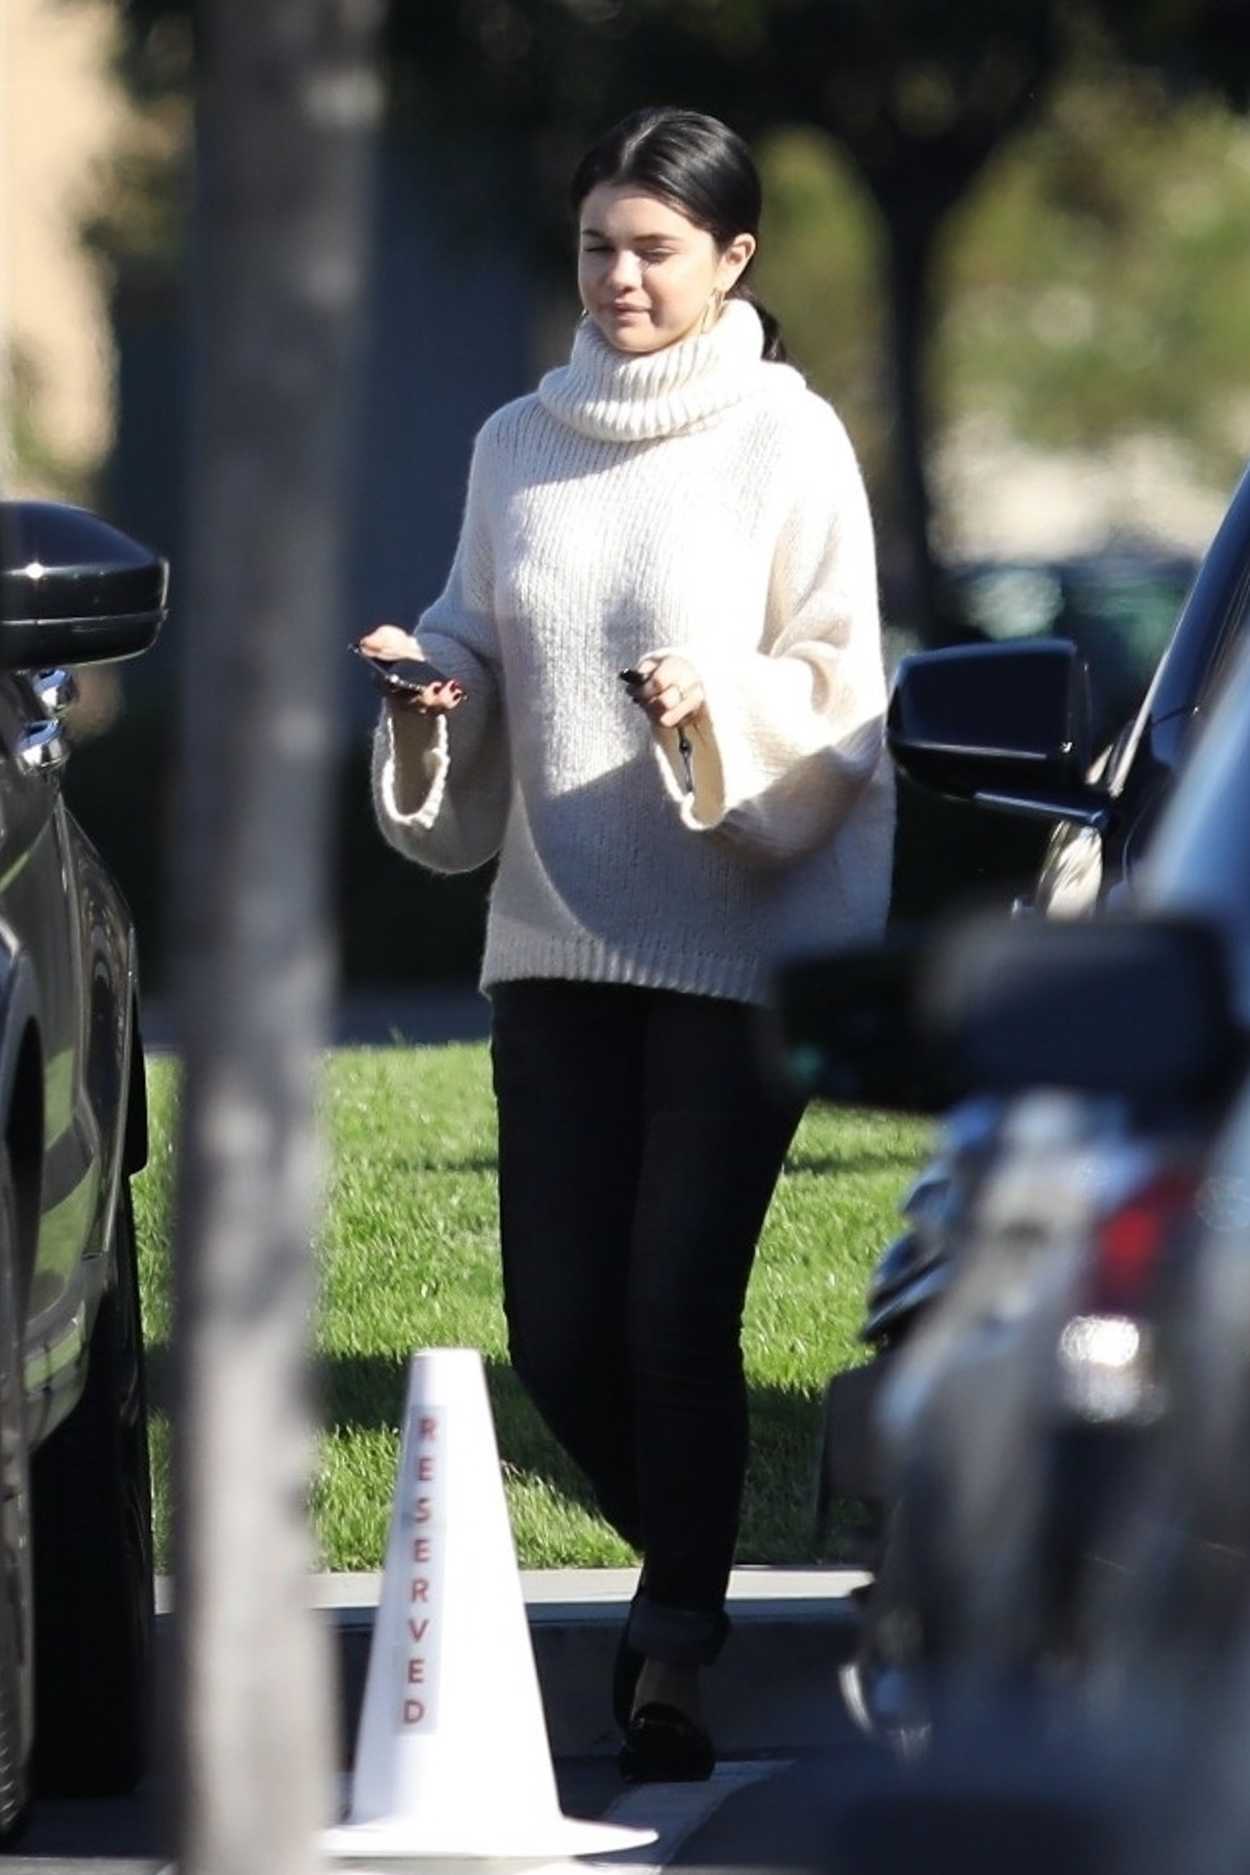 Selena Gomez in a White Sweater Attends Sunday Church Services Ahead of ...